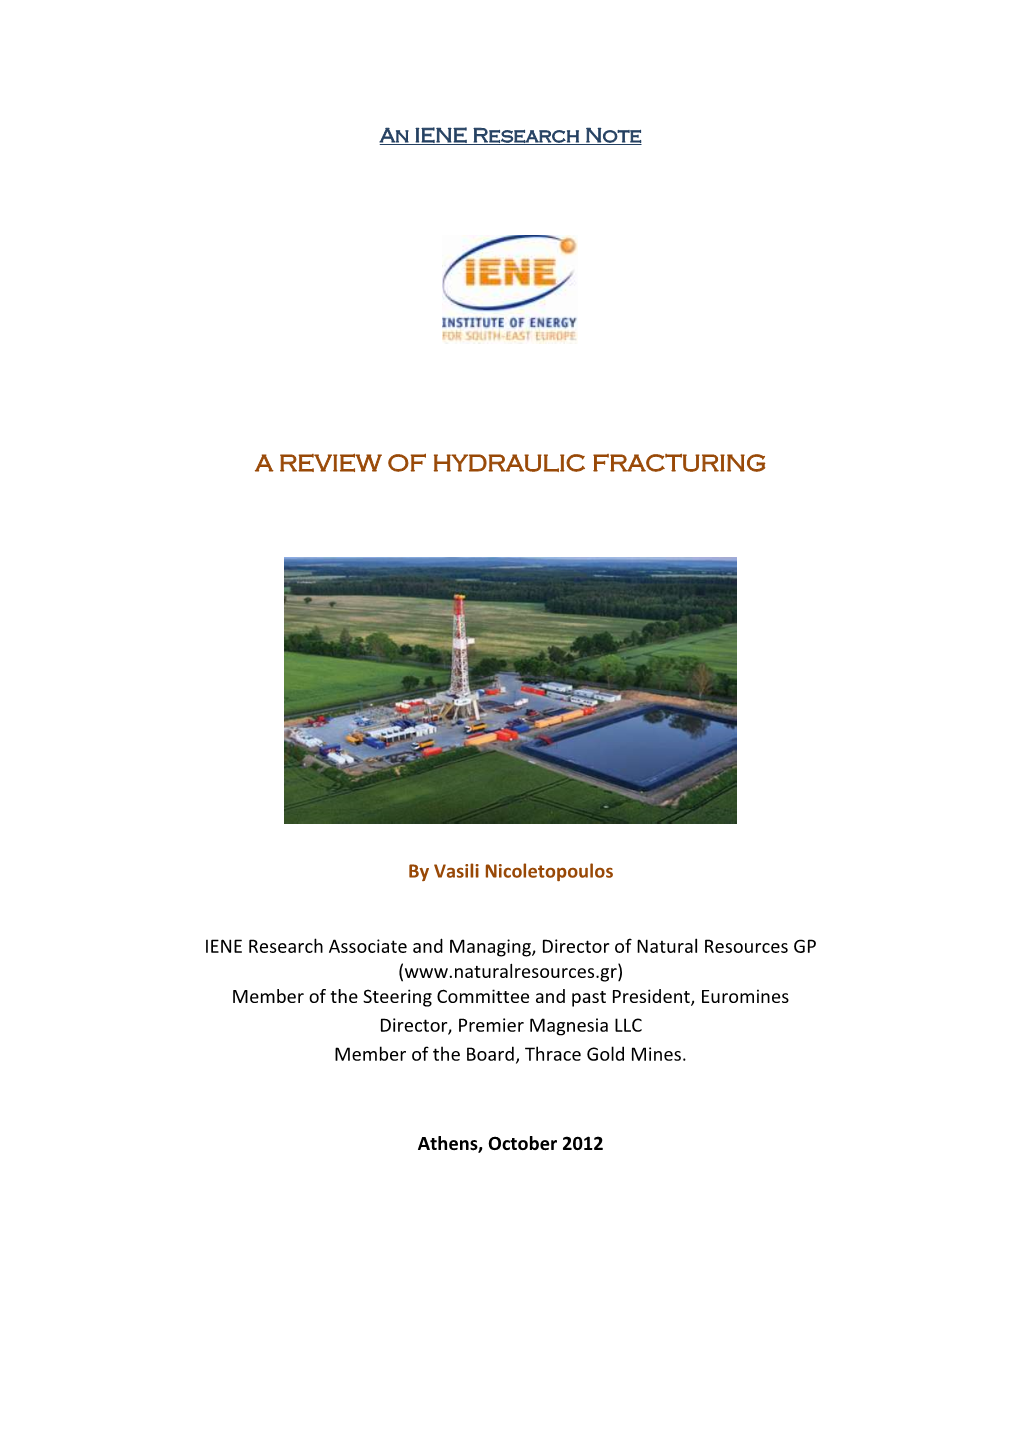 A Review of Hydraulic Fracturing